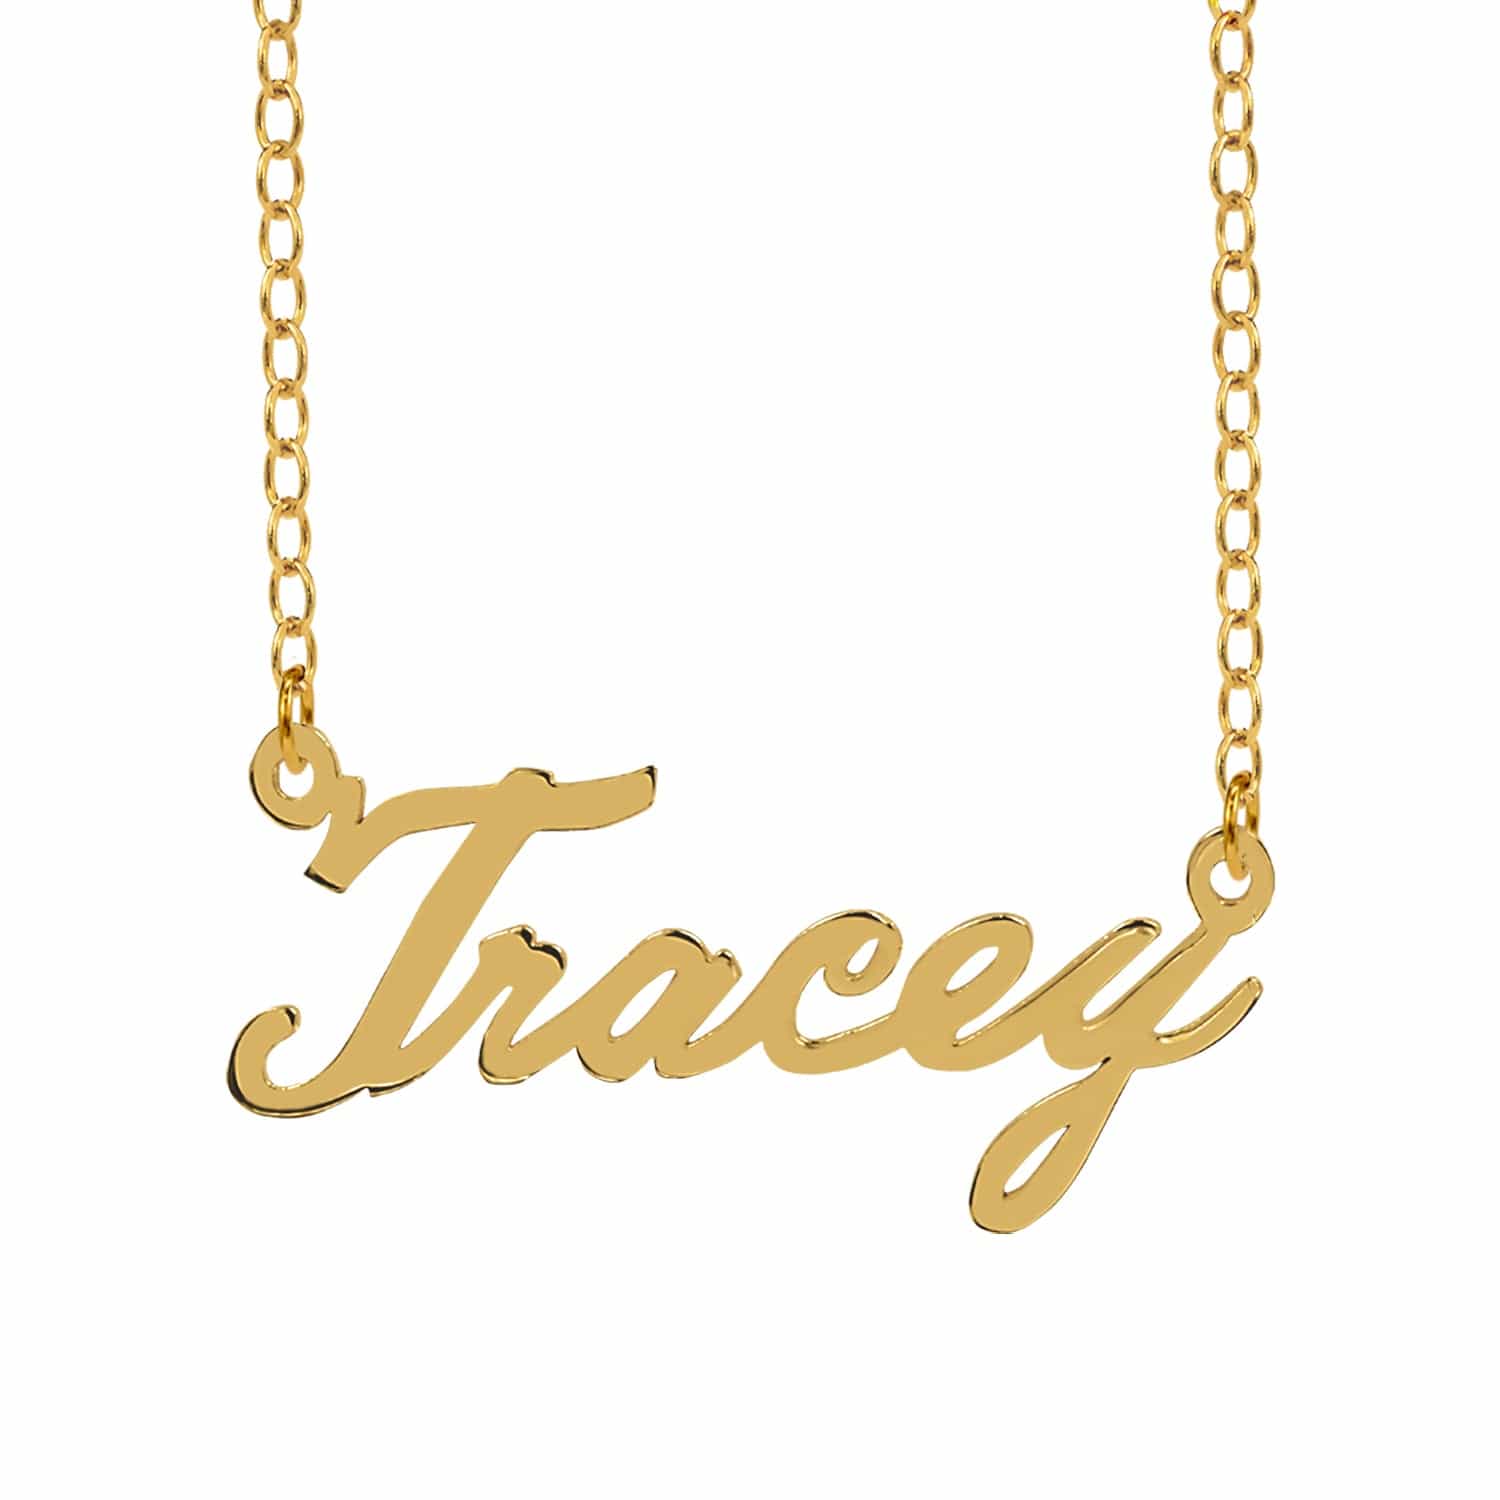 tracey name